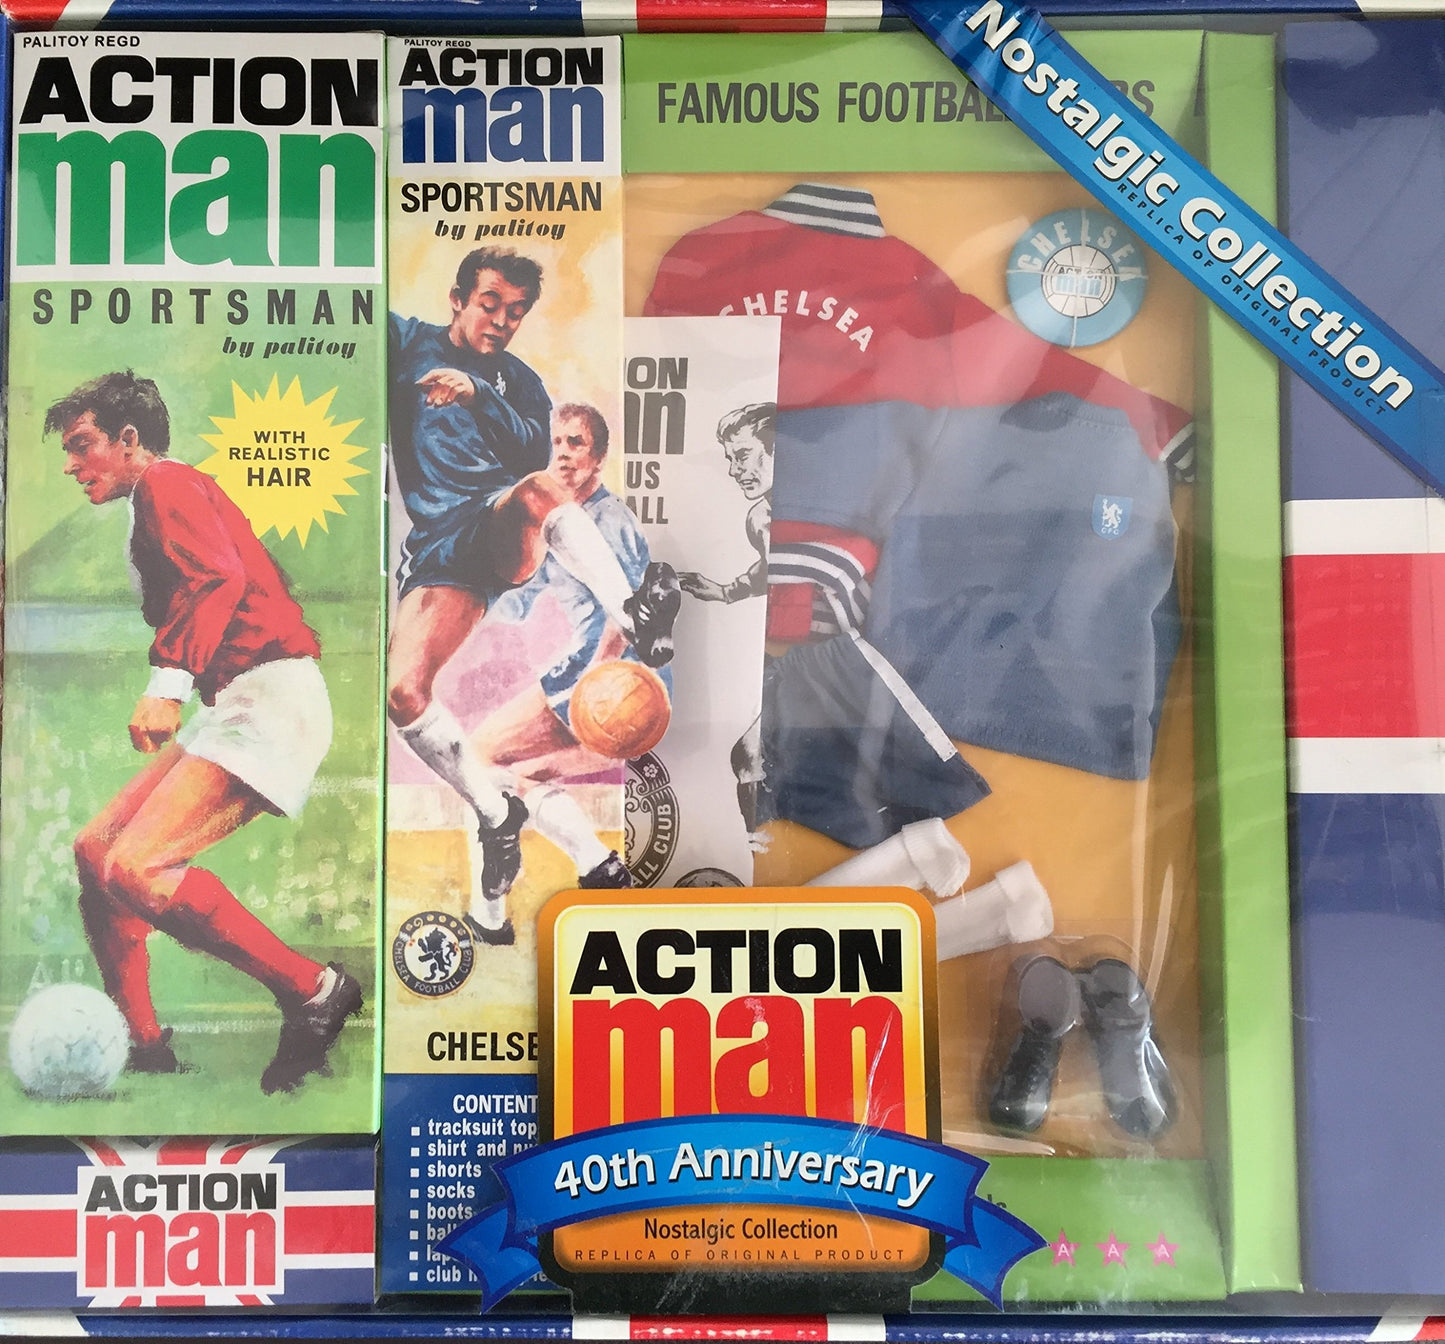 Action Man 40th Anniversary Nostalgic Collection Famous Football Clubs - Chelsea - Includes Action Man & Chelsea Football Kit Box Set Brand New And Factory Sealed Shop Stock Room Find